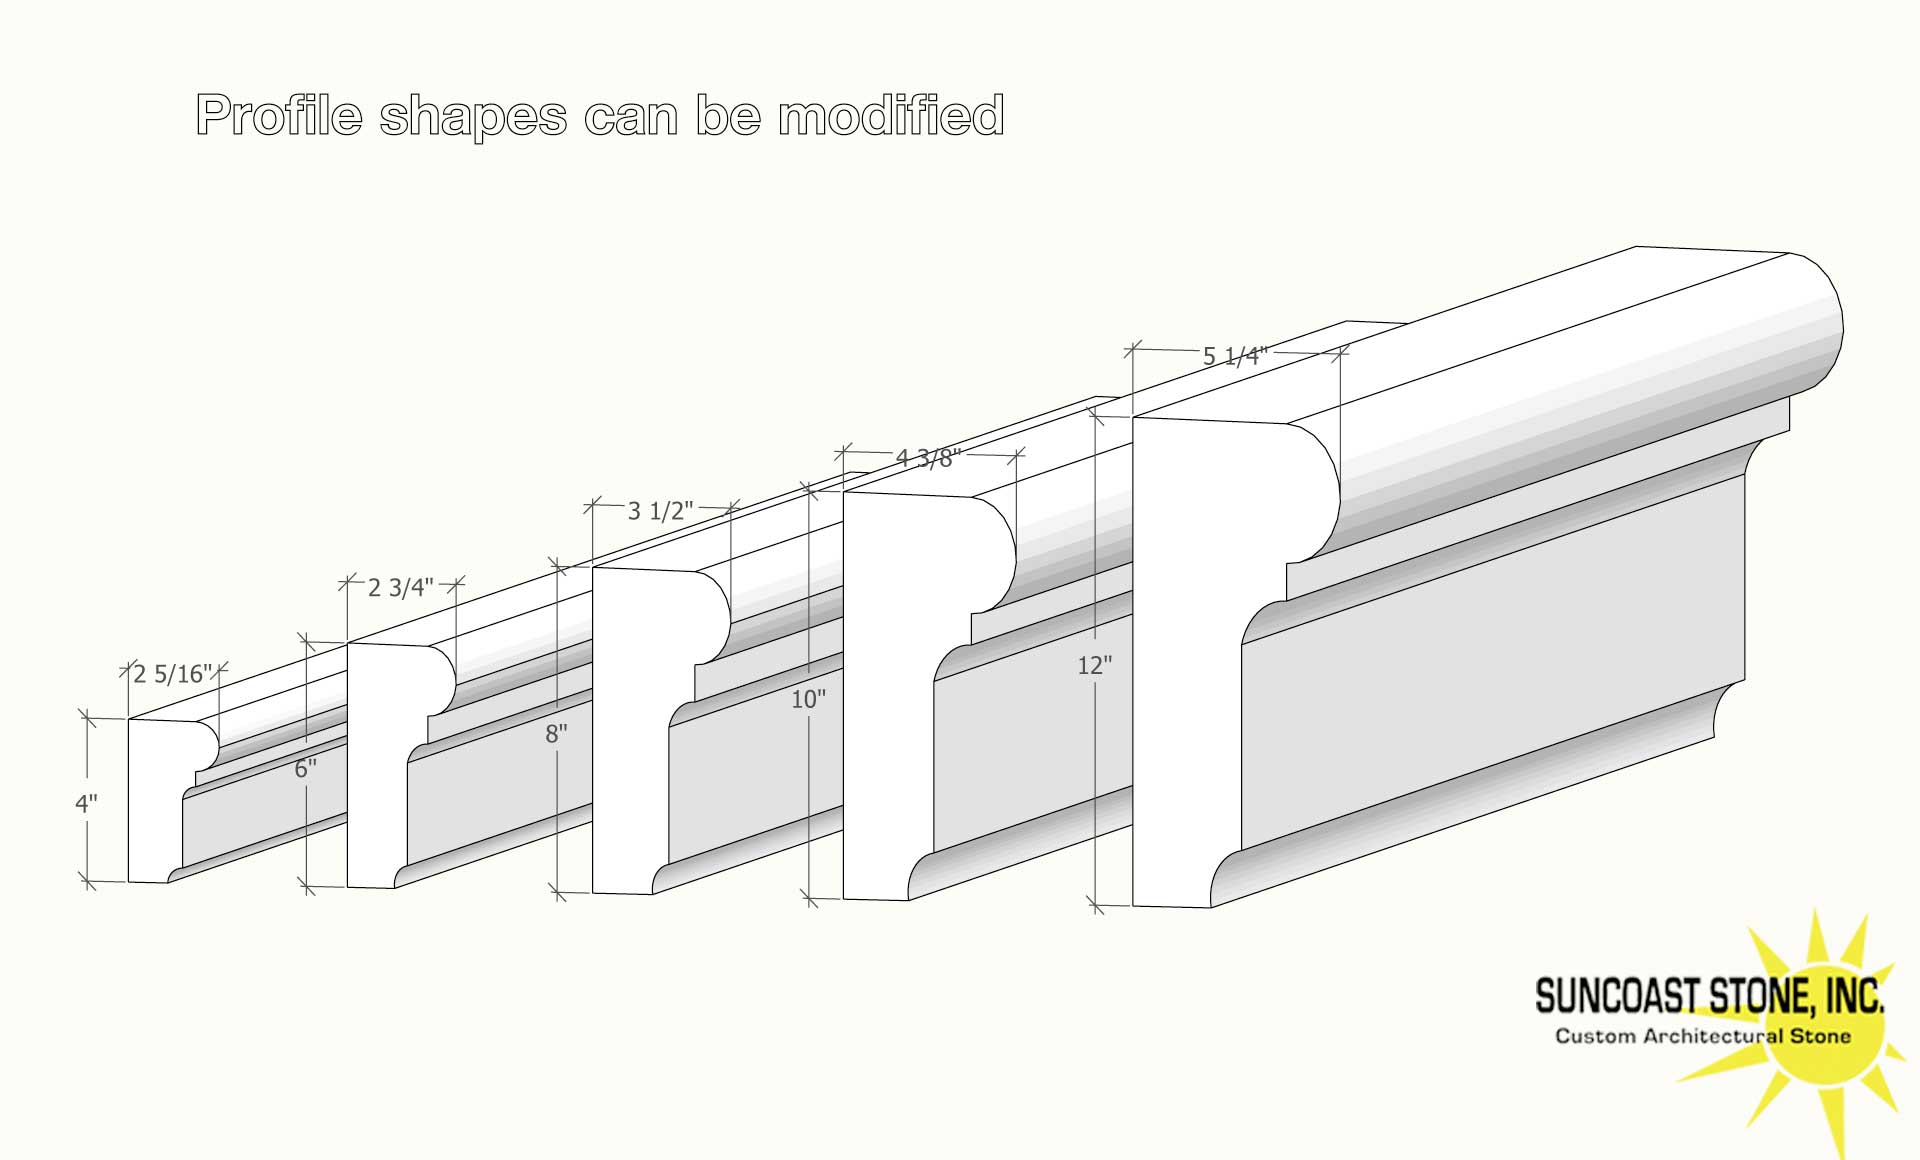 3d view of a range of exterior trim profiles in cast stone